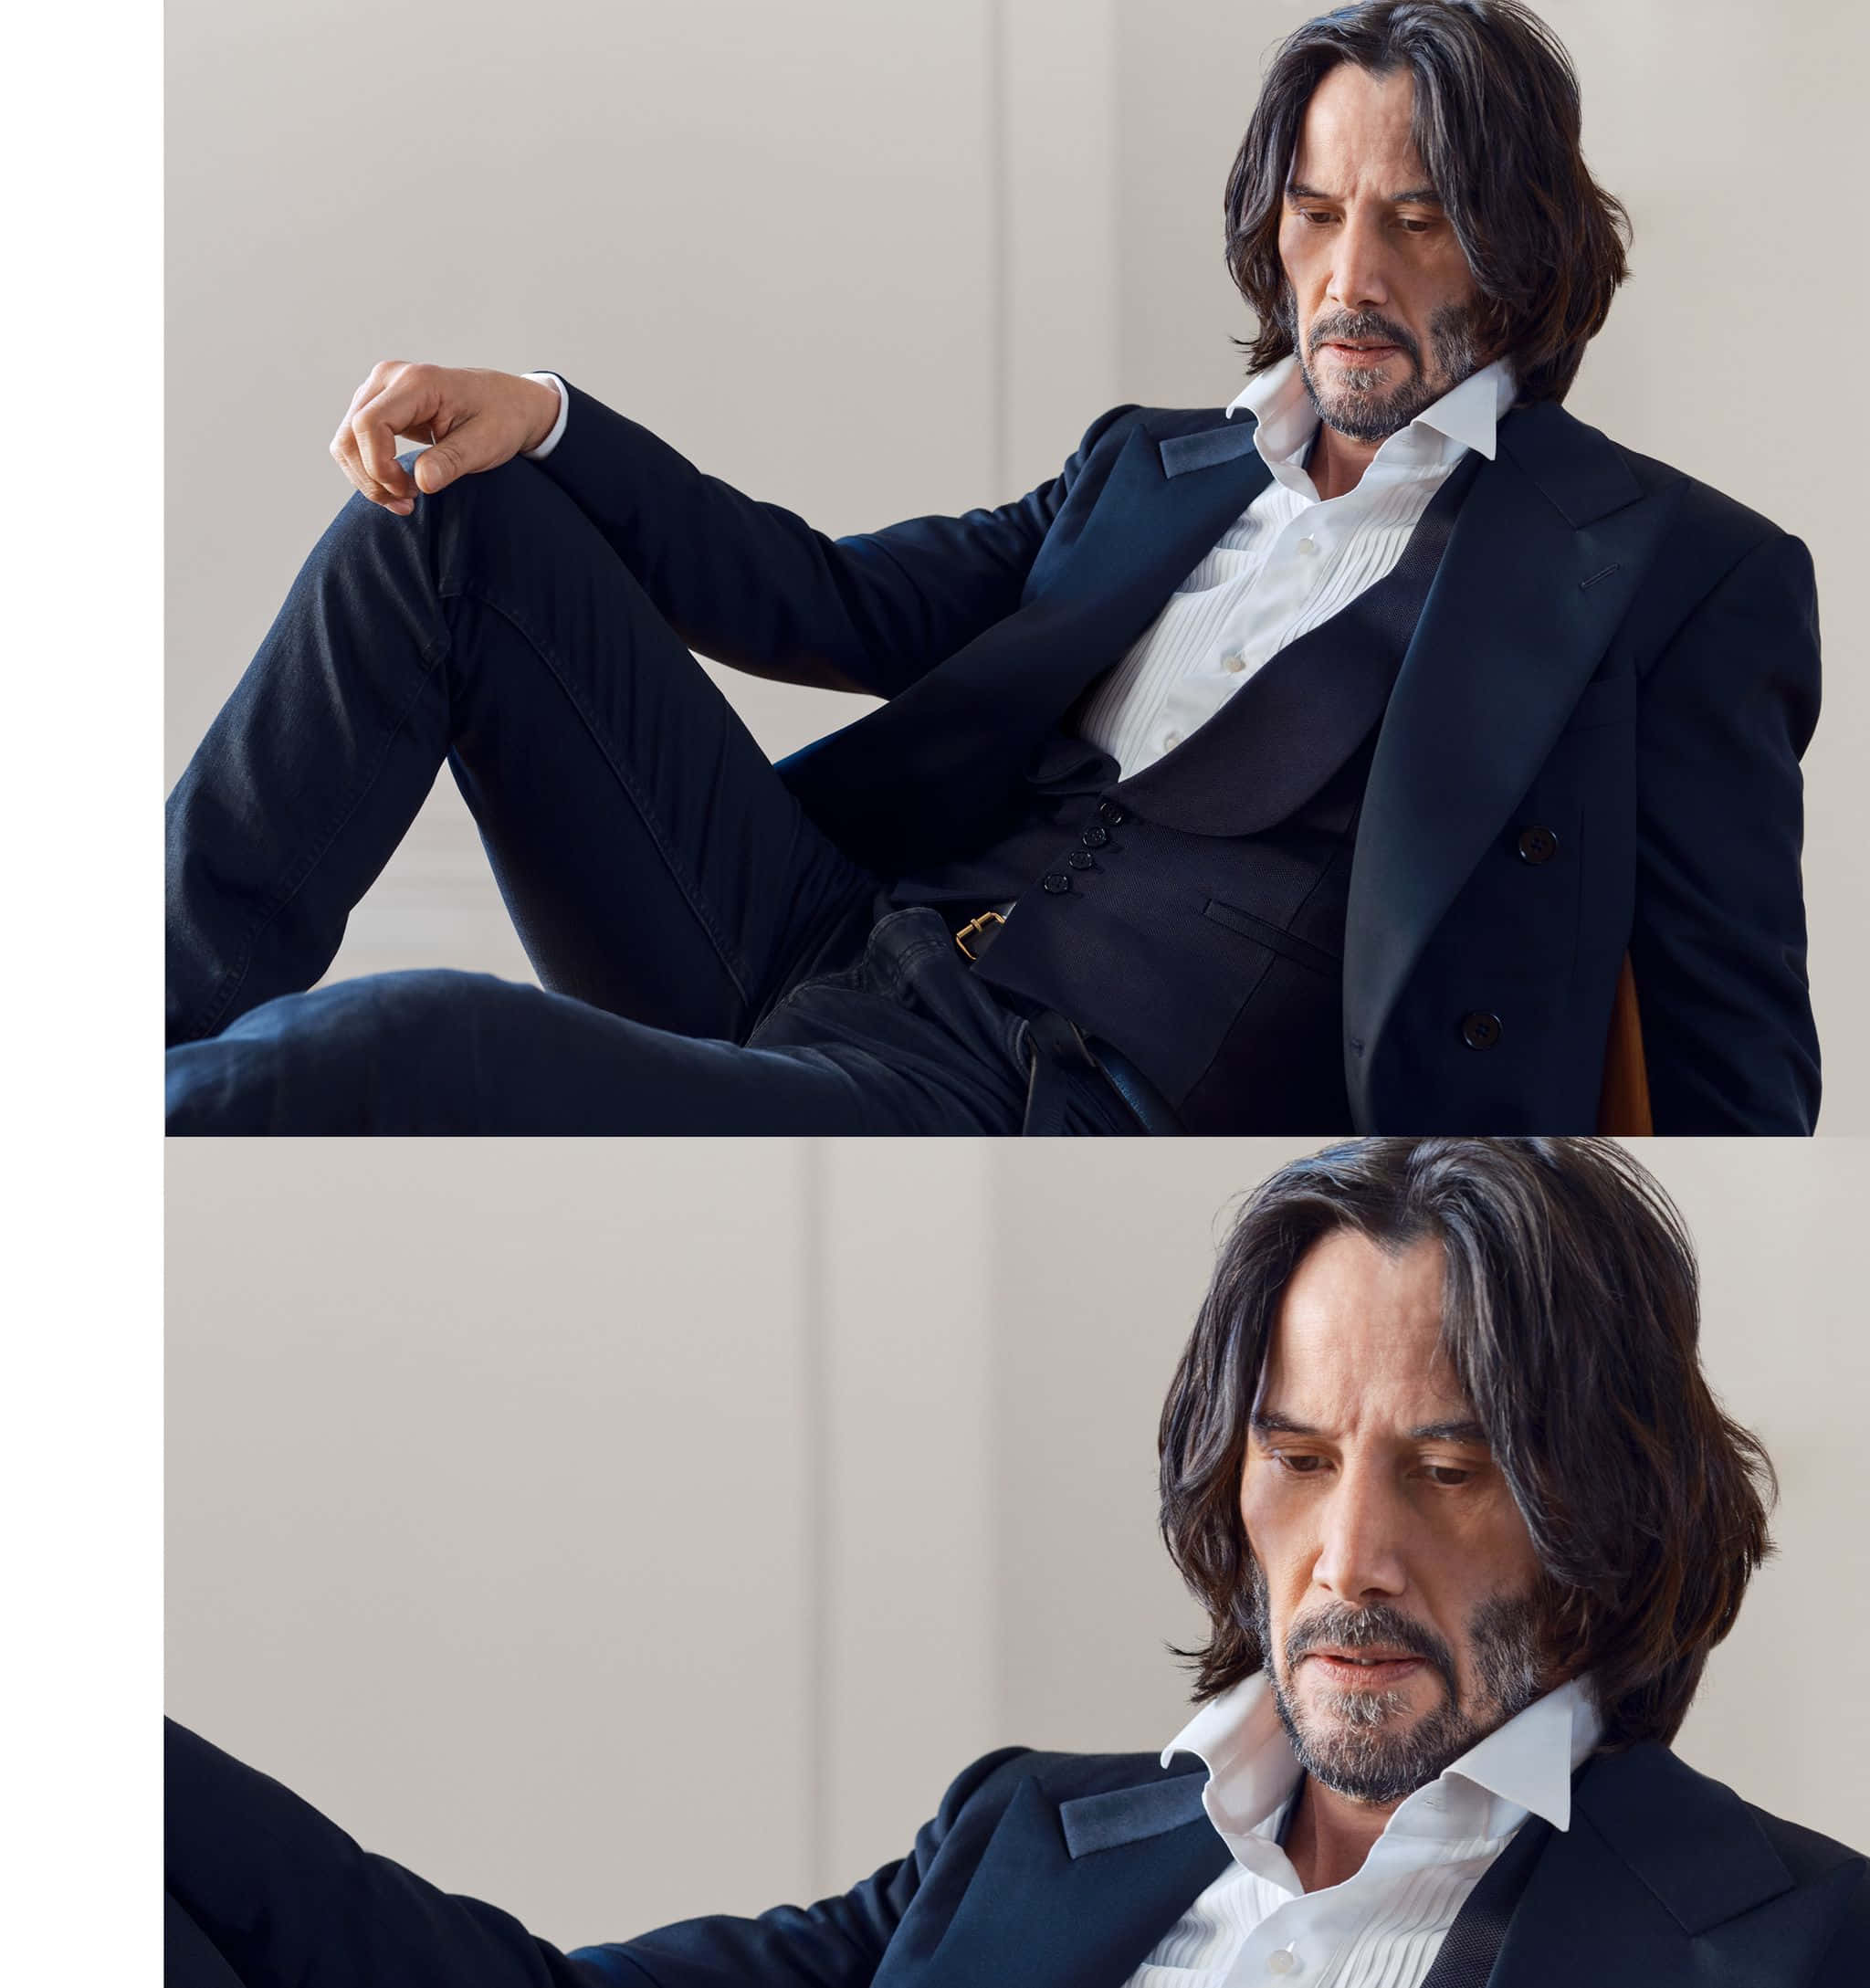 A Stylish Keanu Reeves in a Black Suit